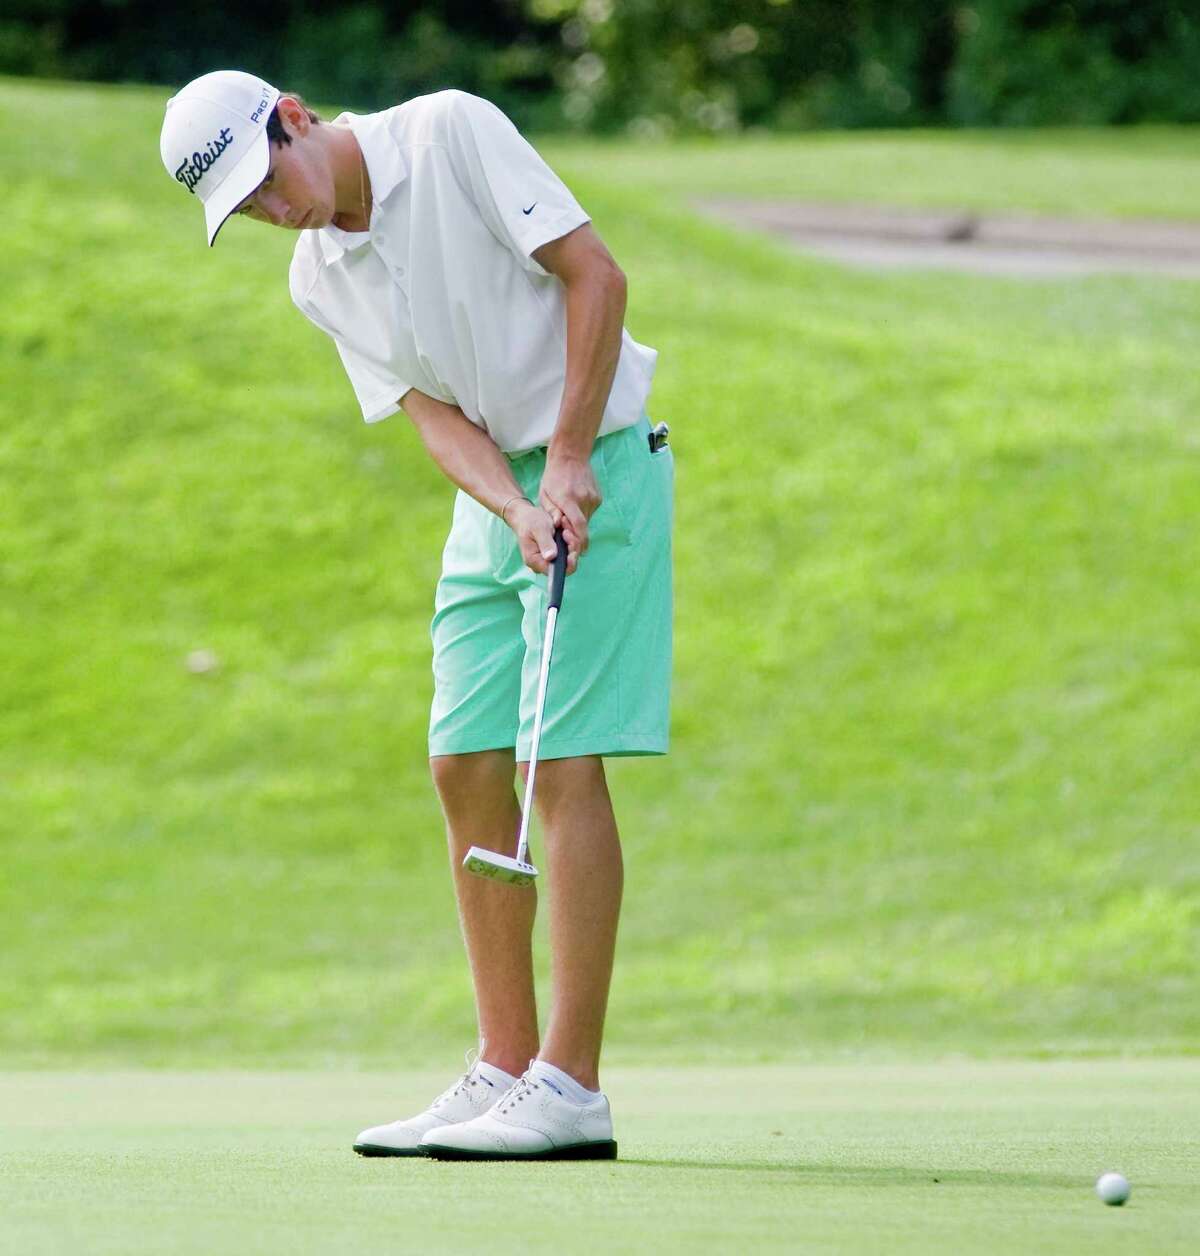 Max Theodorakis putting on the 11th hole at the Danbury Amateur golf tournament at Richter Park. Sunday, July 20, 2014